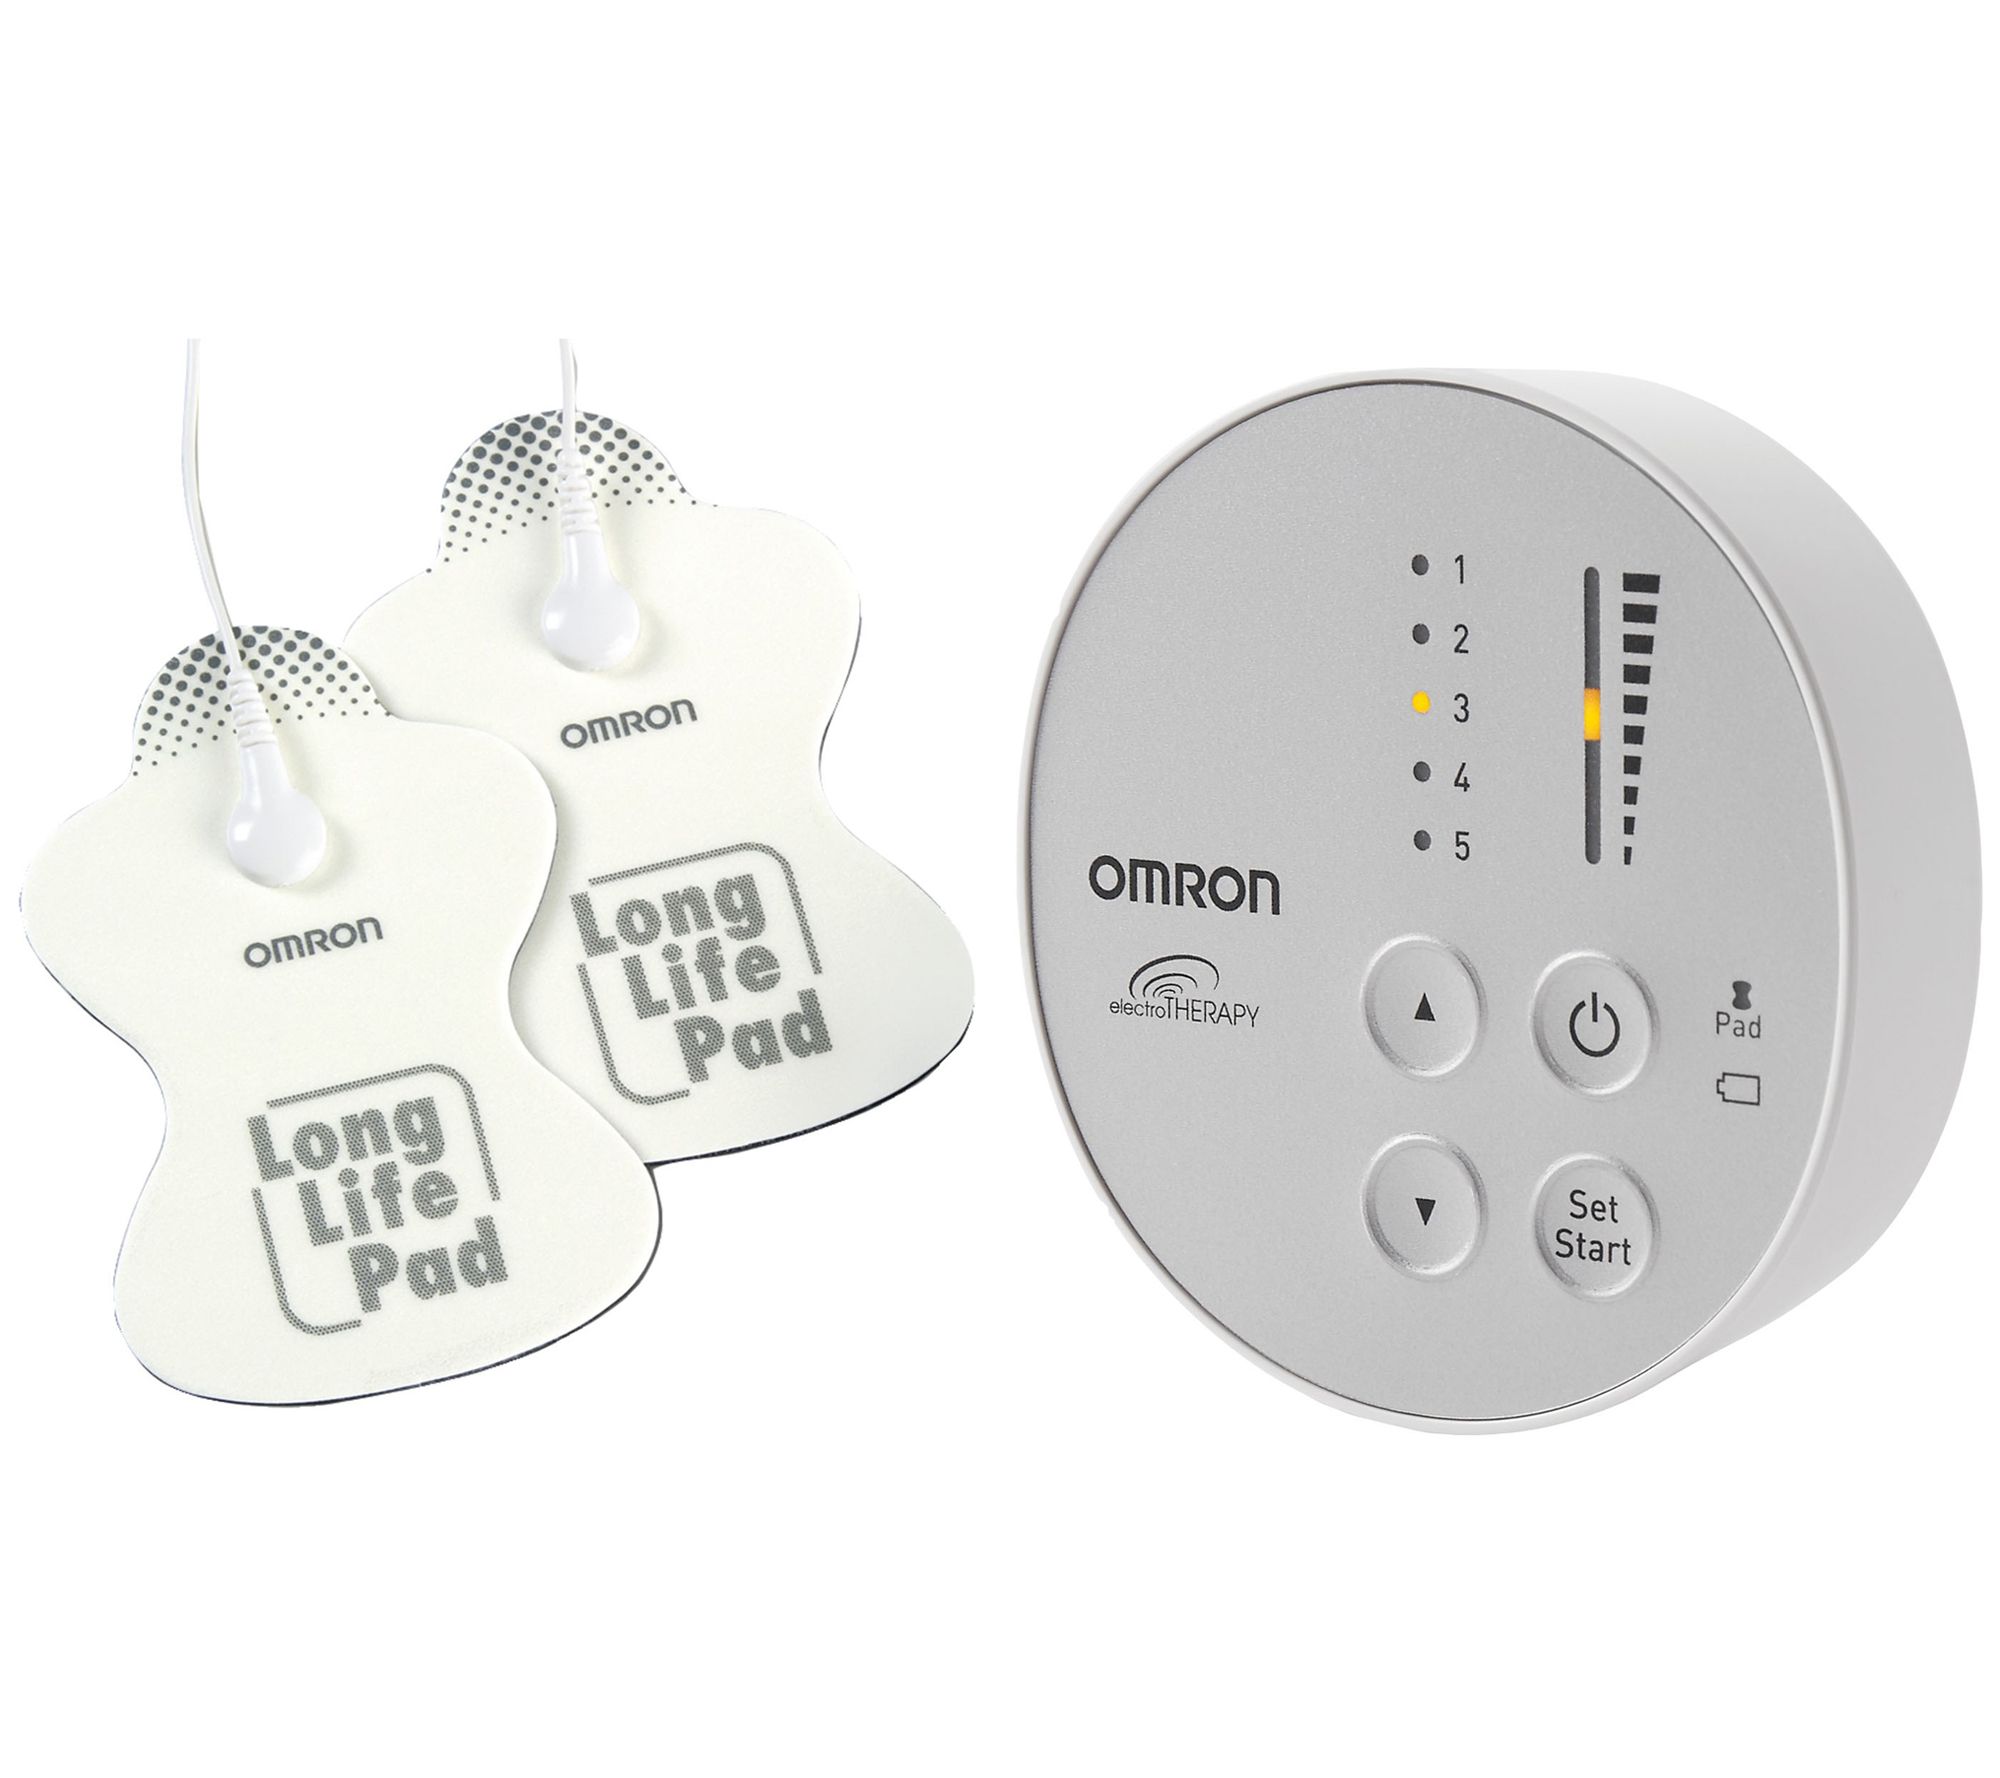 Omron Pain Relief Pro TENS - A personal TENS unit for multiple